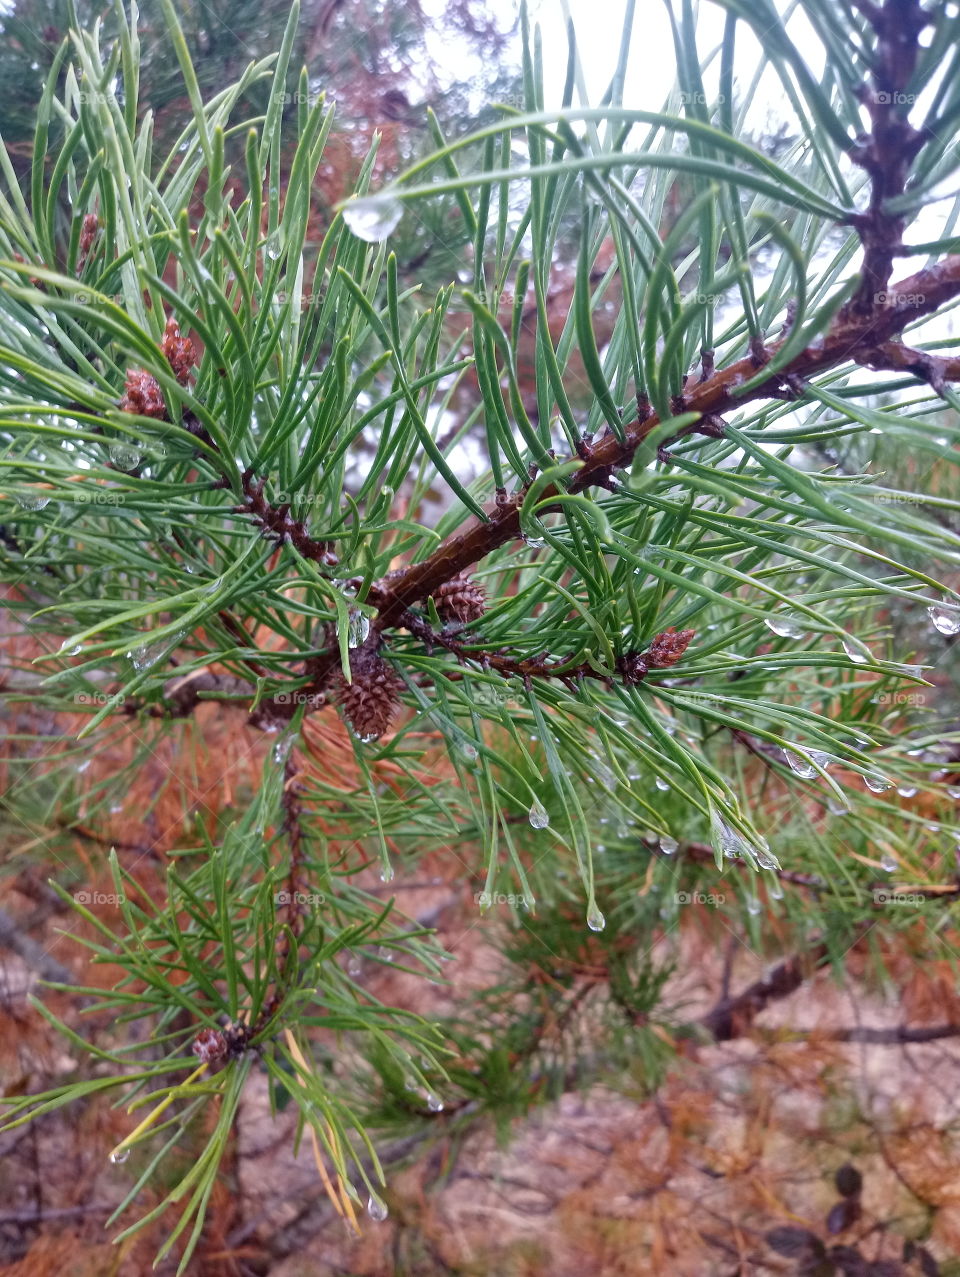 Pine needle closeup with baby pine cones on branch in fall morning dew